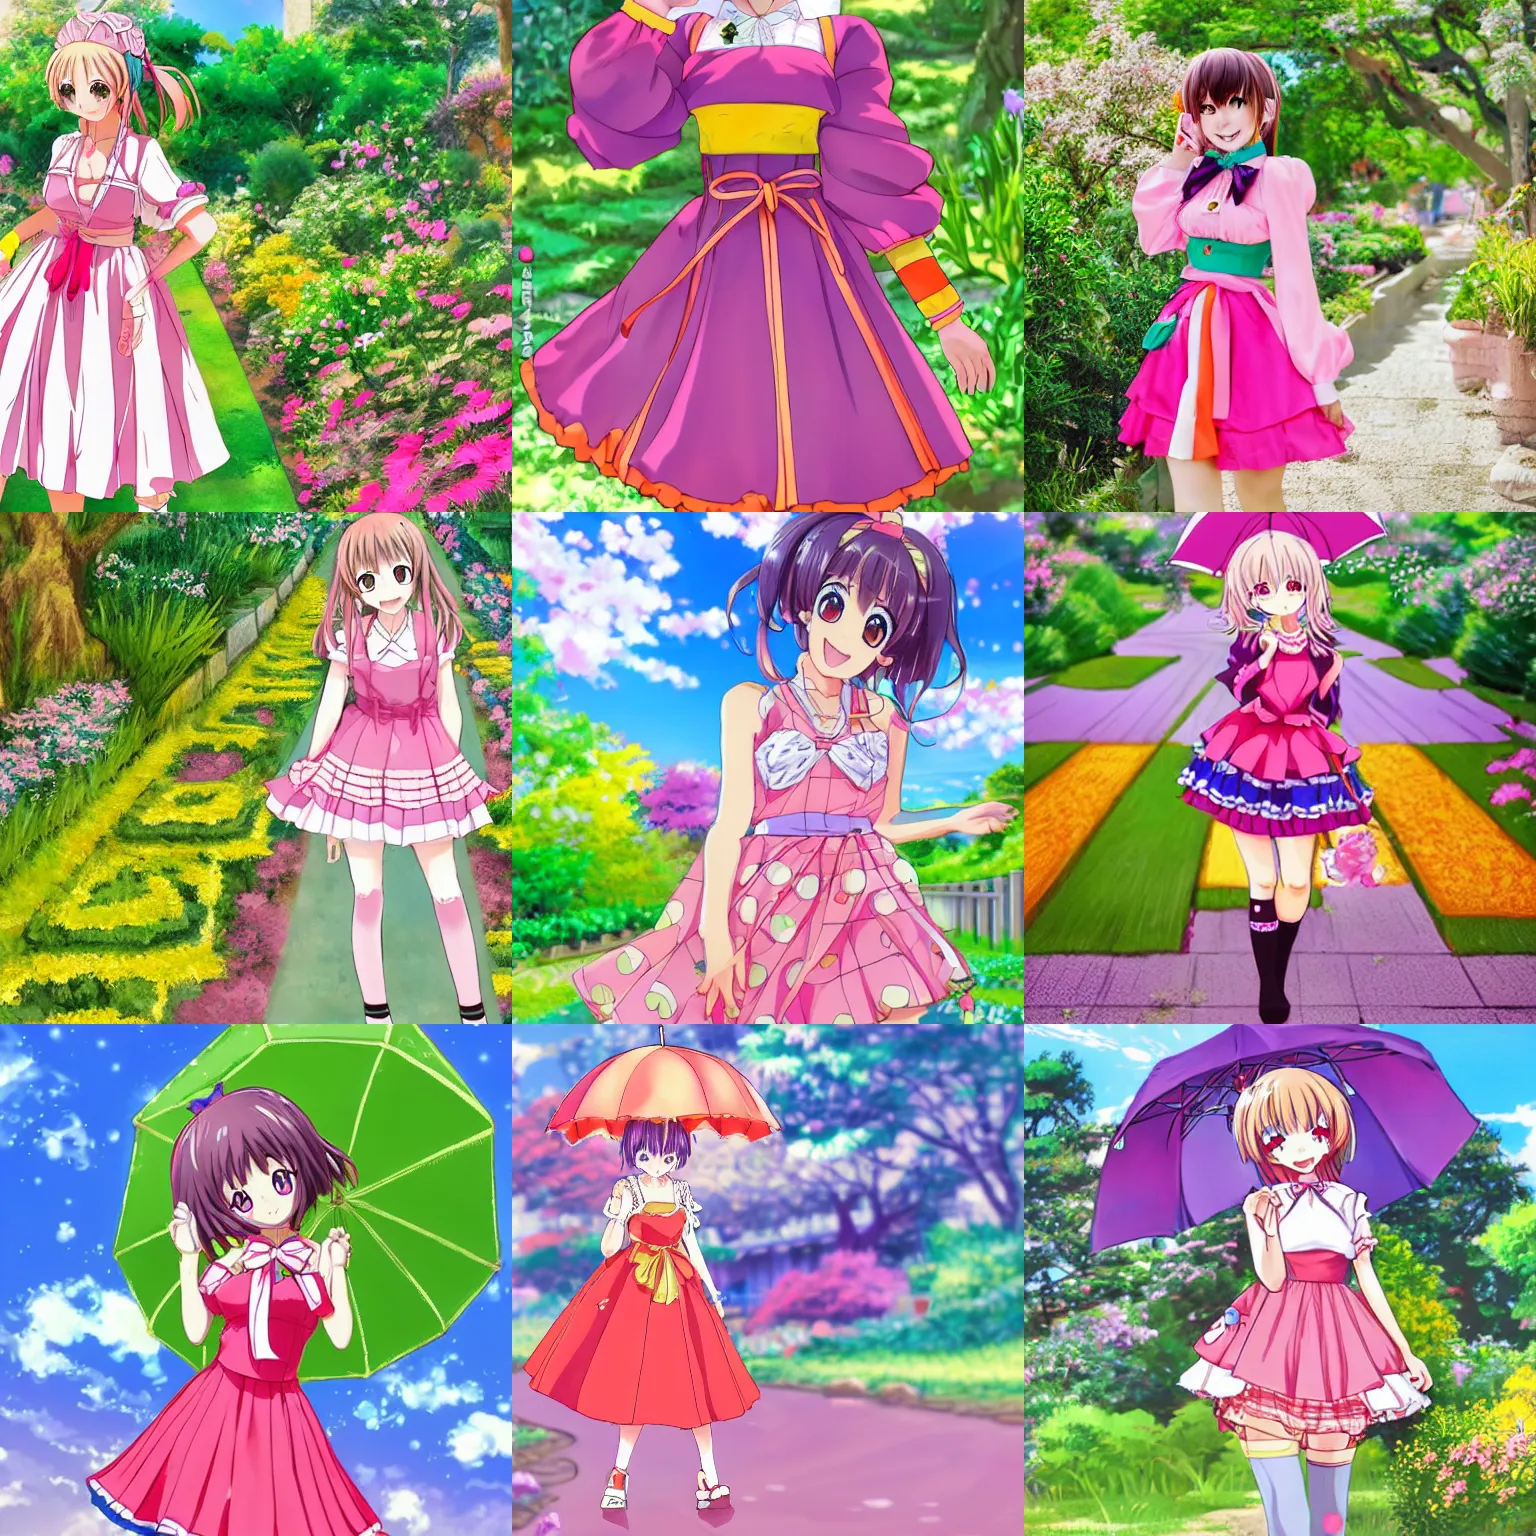 Prompt: a very cute art of a smiling anime girl idol wearing a colorful dress, walking at the garden, detailed, in the style of anime